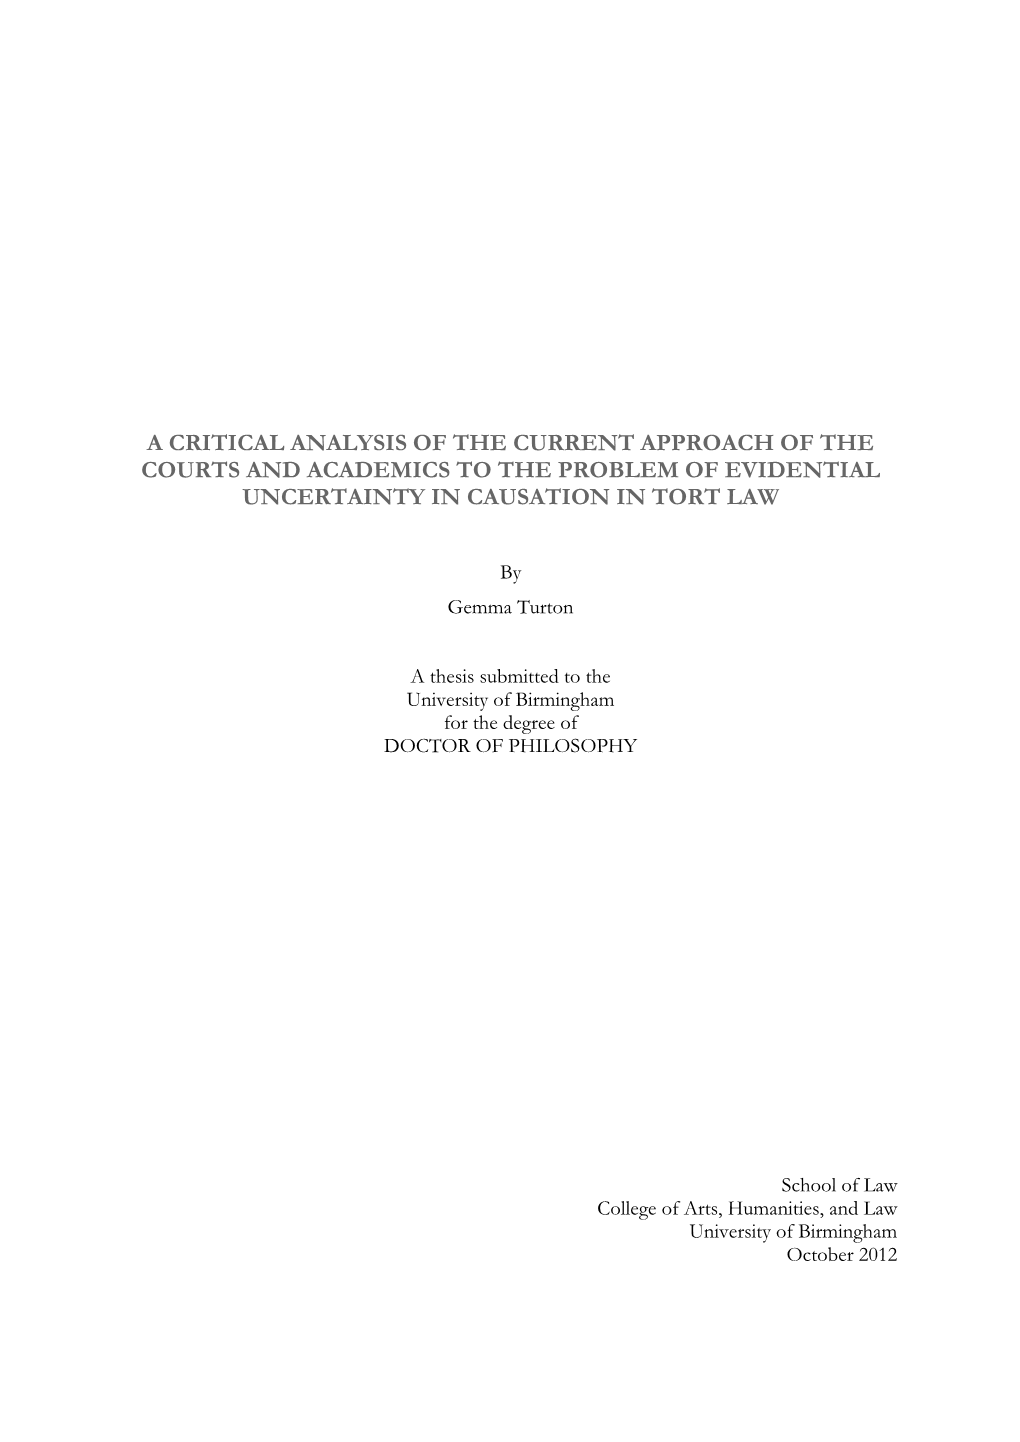 A Critical Analysis of the Current Approach of the Courts and Academics to the Problem of Evidential Uncertainty in Causation in Tort Law